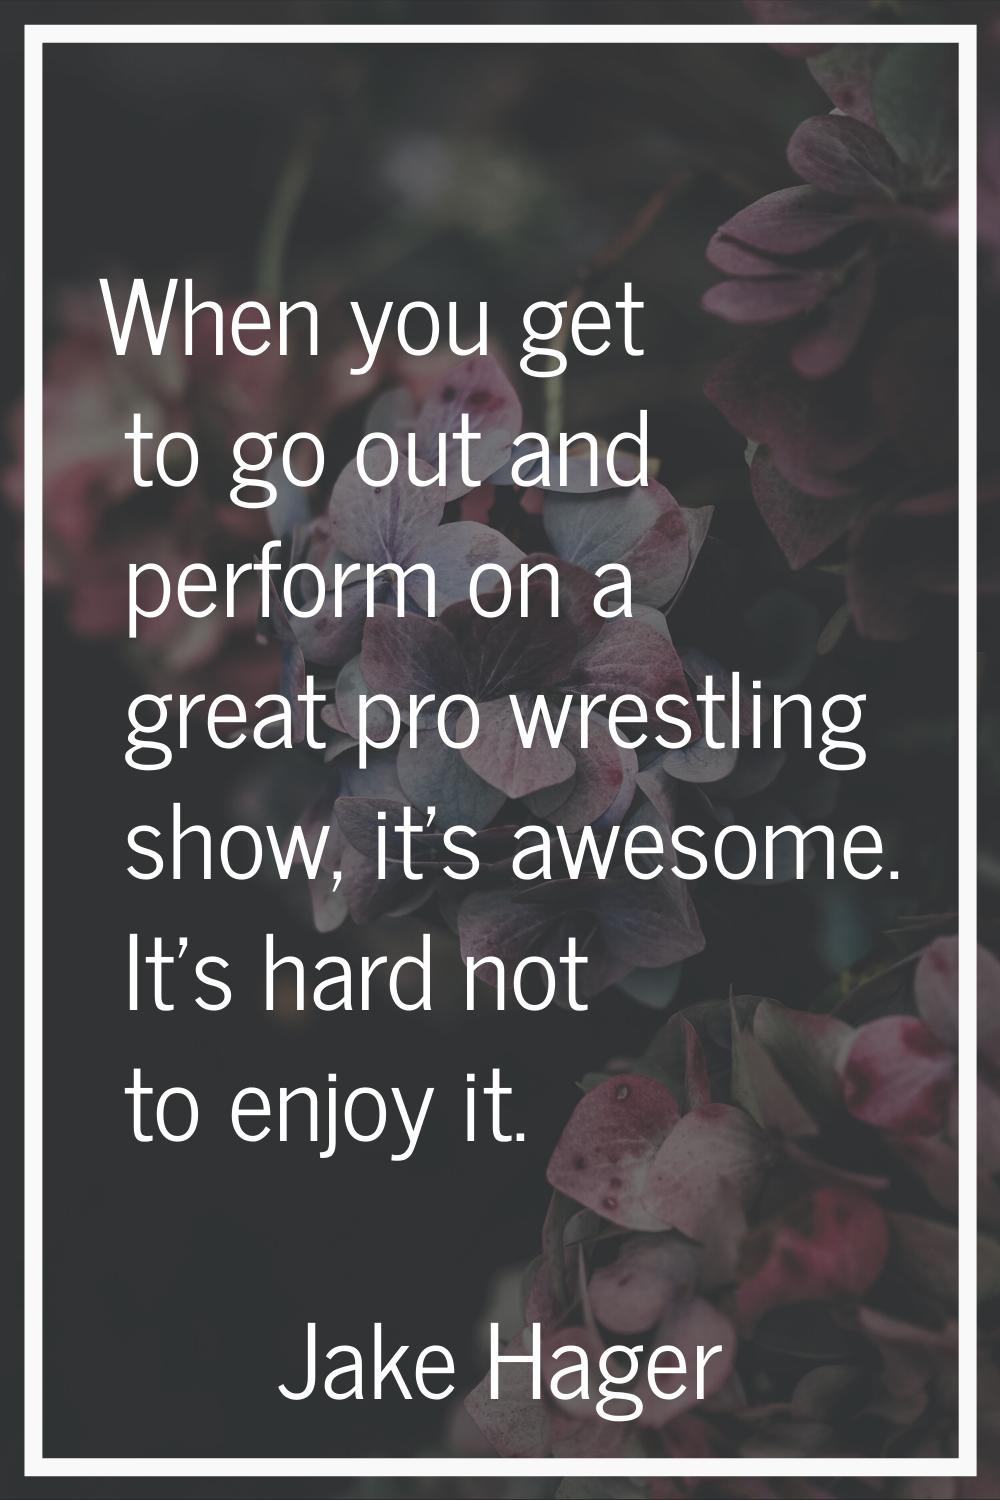 When you get to go out and perform on a great pro wrestling show, it's awesome. It's hard not to en